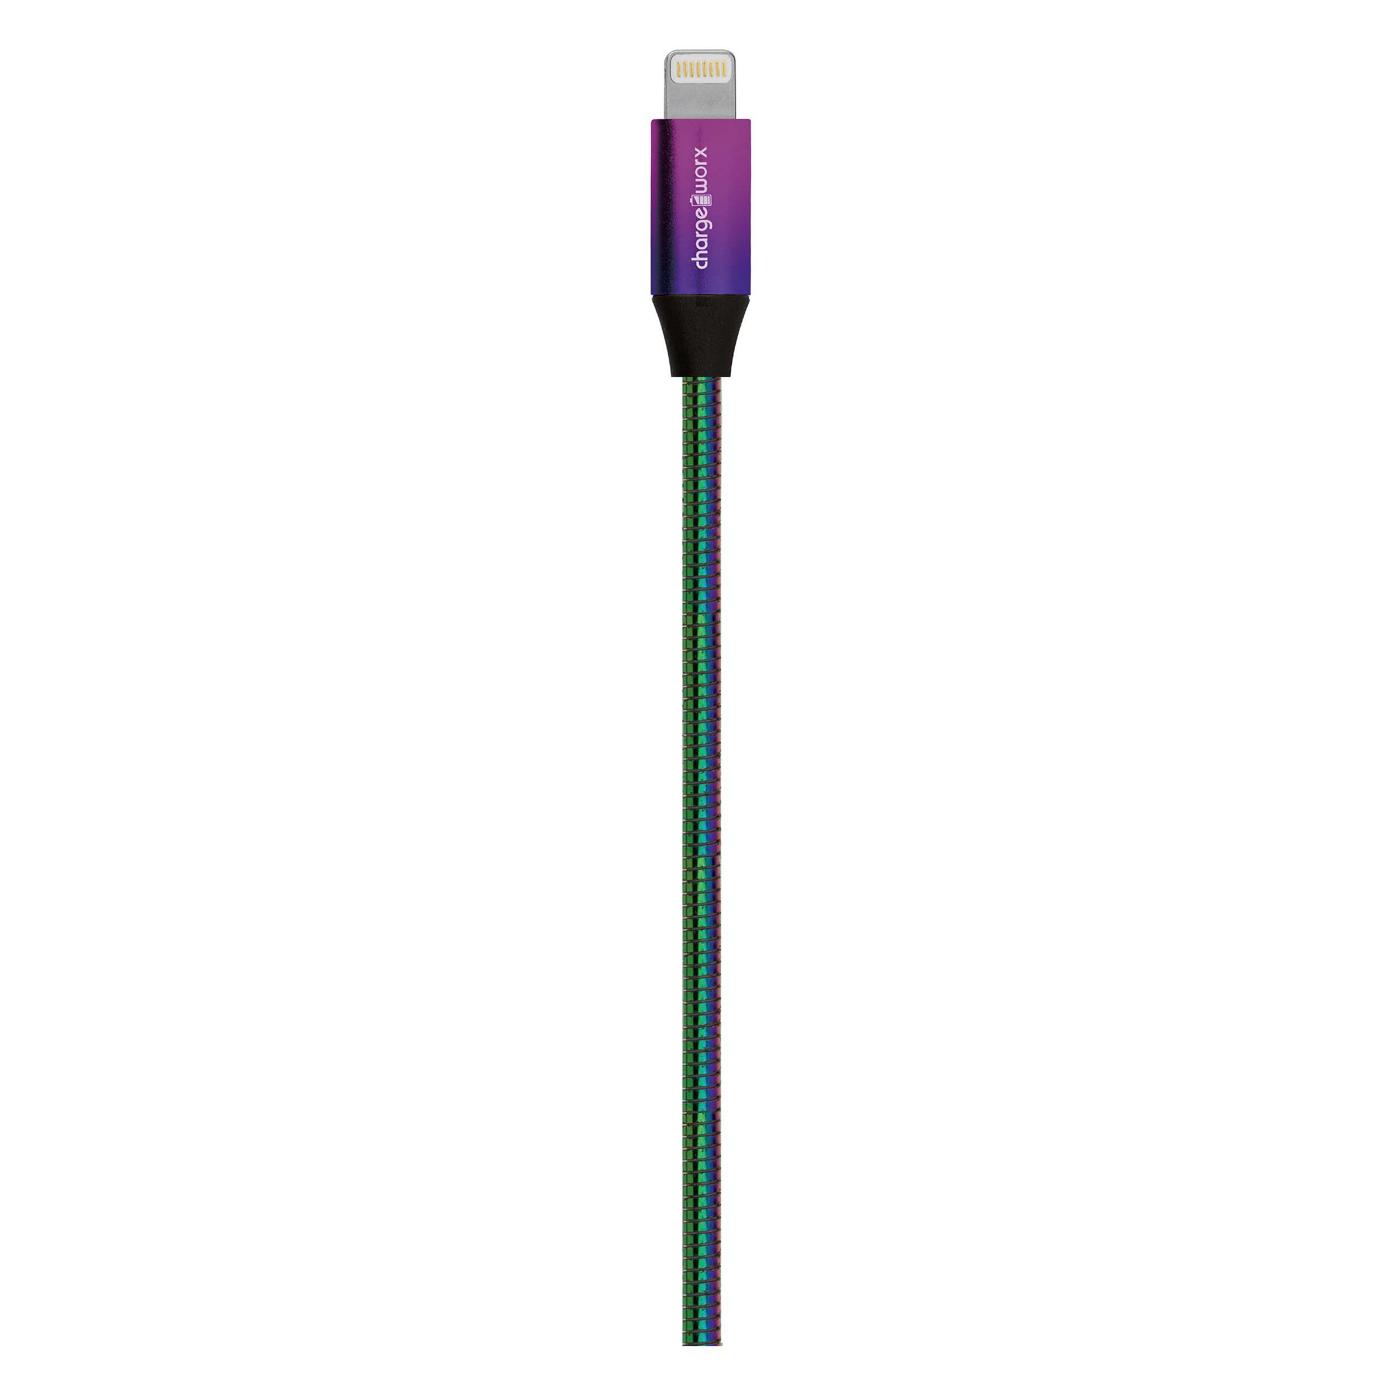 ChargeWorx Lightning Connector Cable - Shop Connection Cables H-E-B